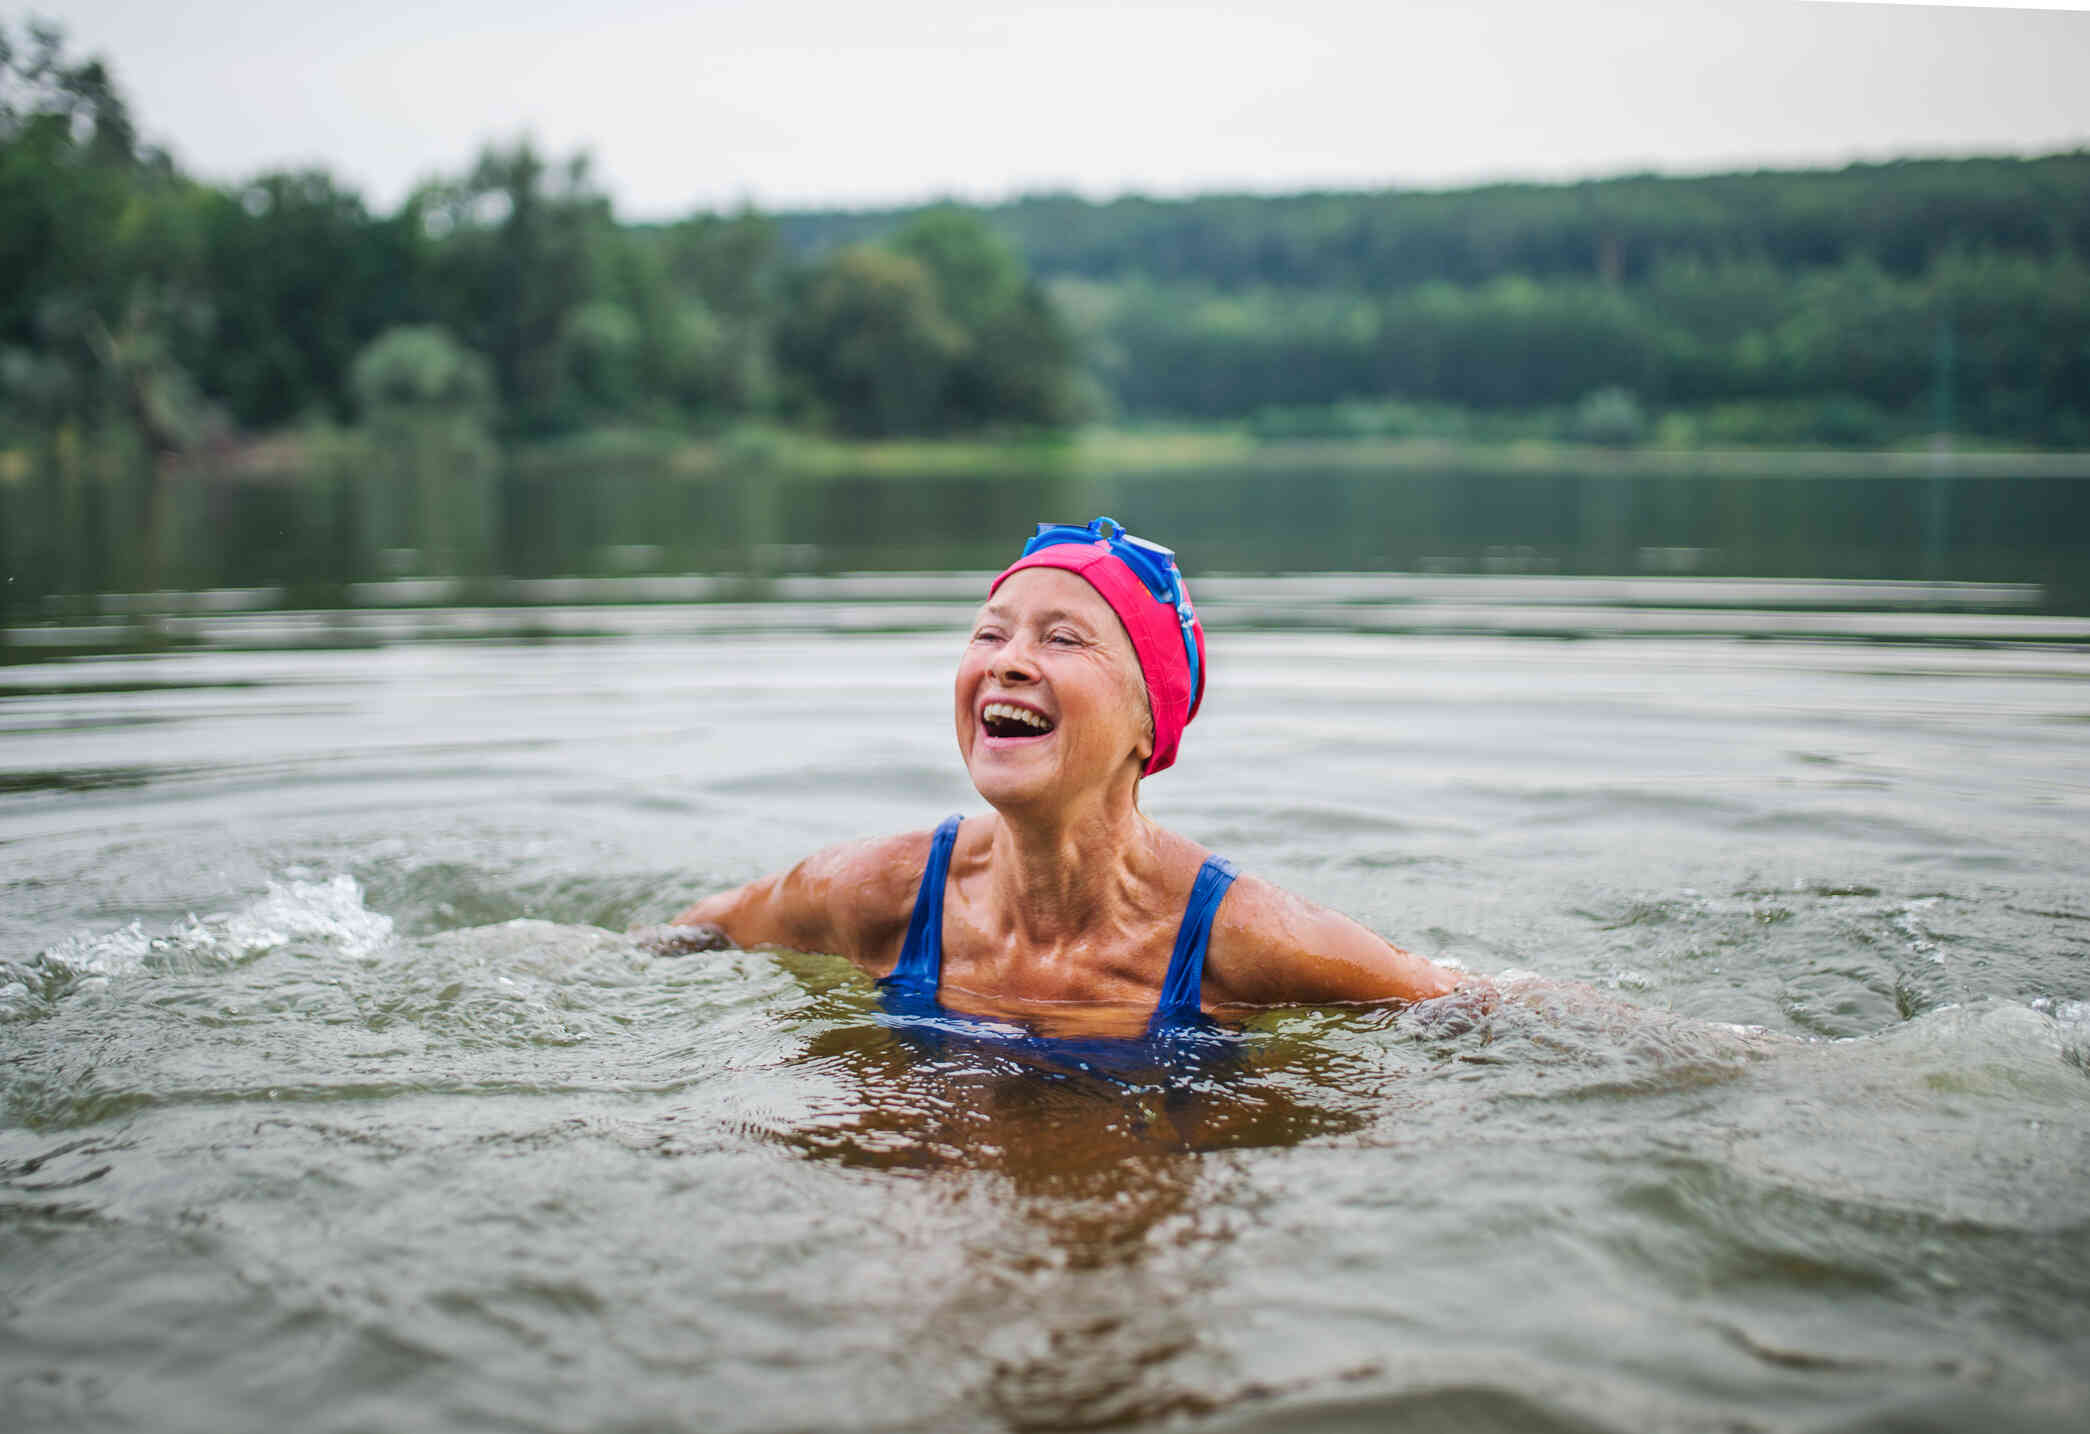 An elderly woman in a pink swimcap smiles brightly while swimming in a lake on a sunny day.